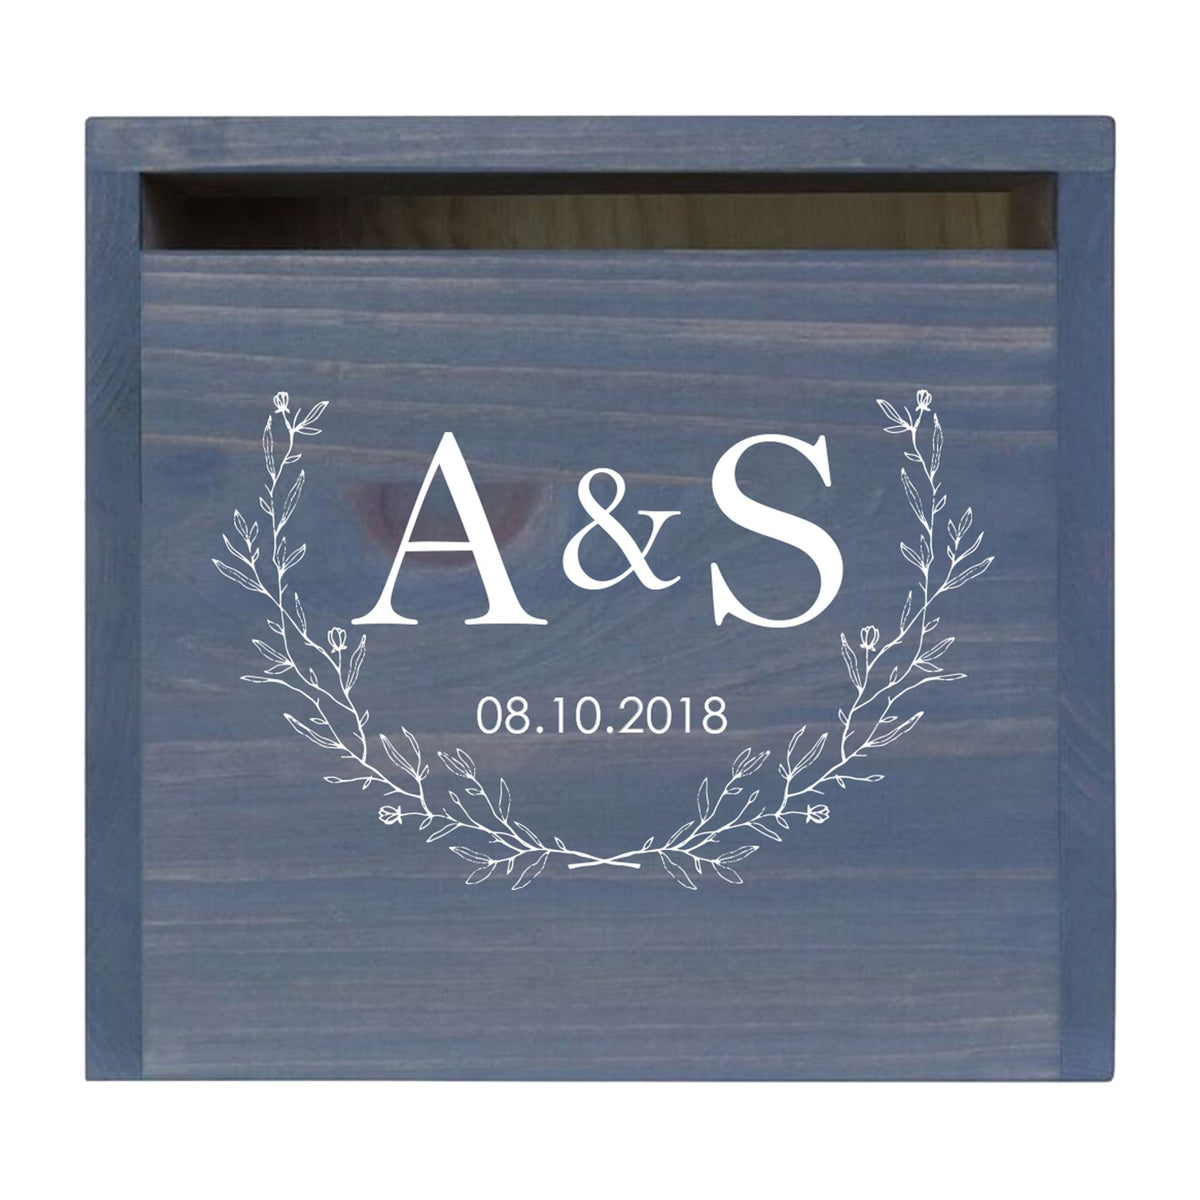 Personalized Wooden Card Box for Wedding Ceremonies, Venues, Receptions, Bridal Showers, and Engagement Parties 13.5x12 - A&amp;S (Leaves) - LifeSong Milestones